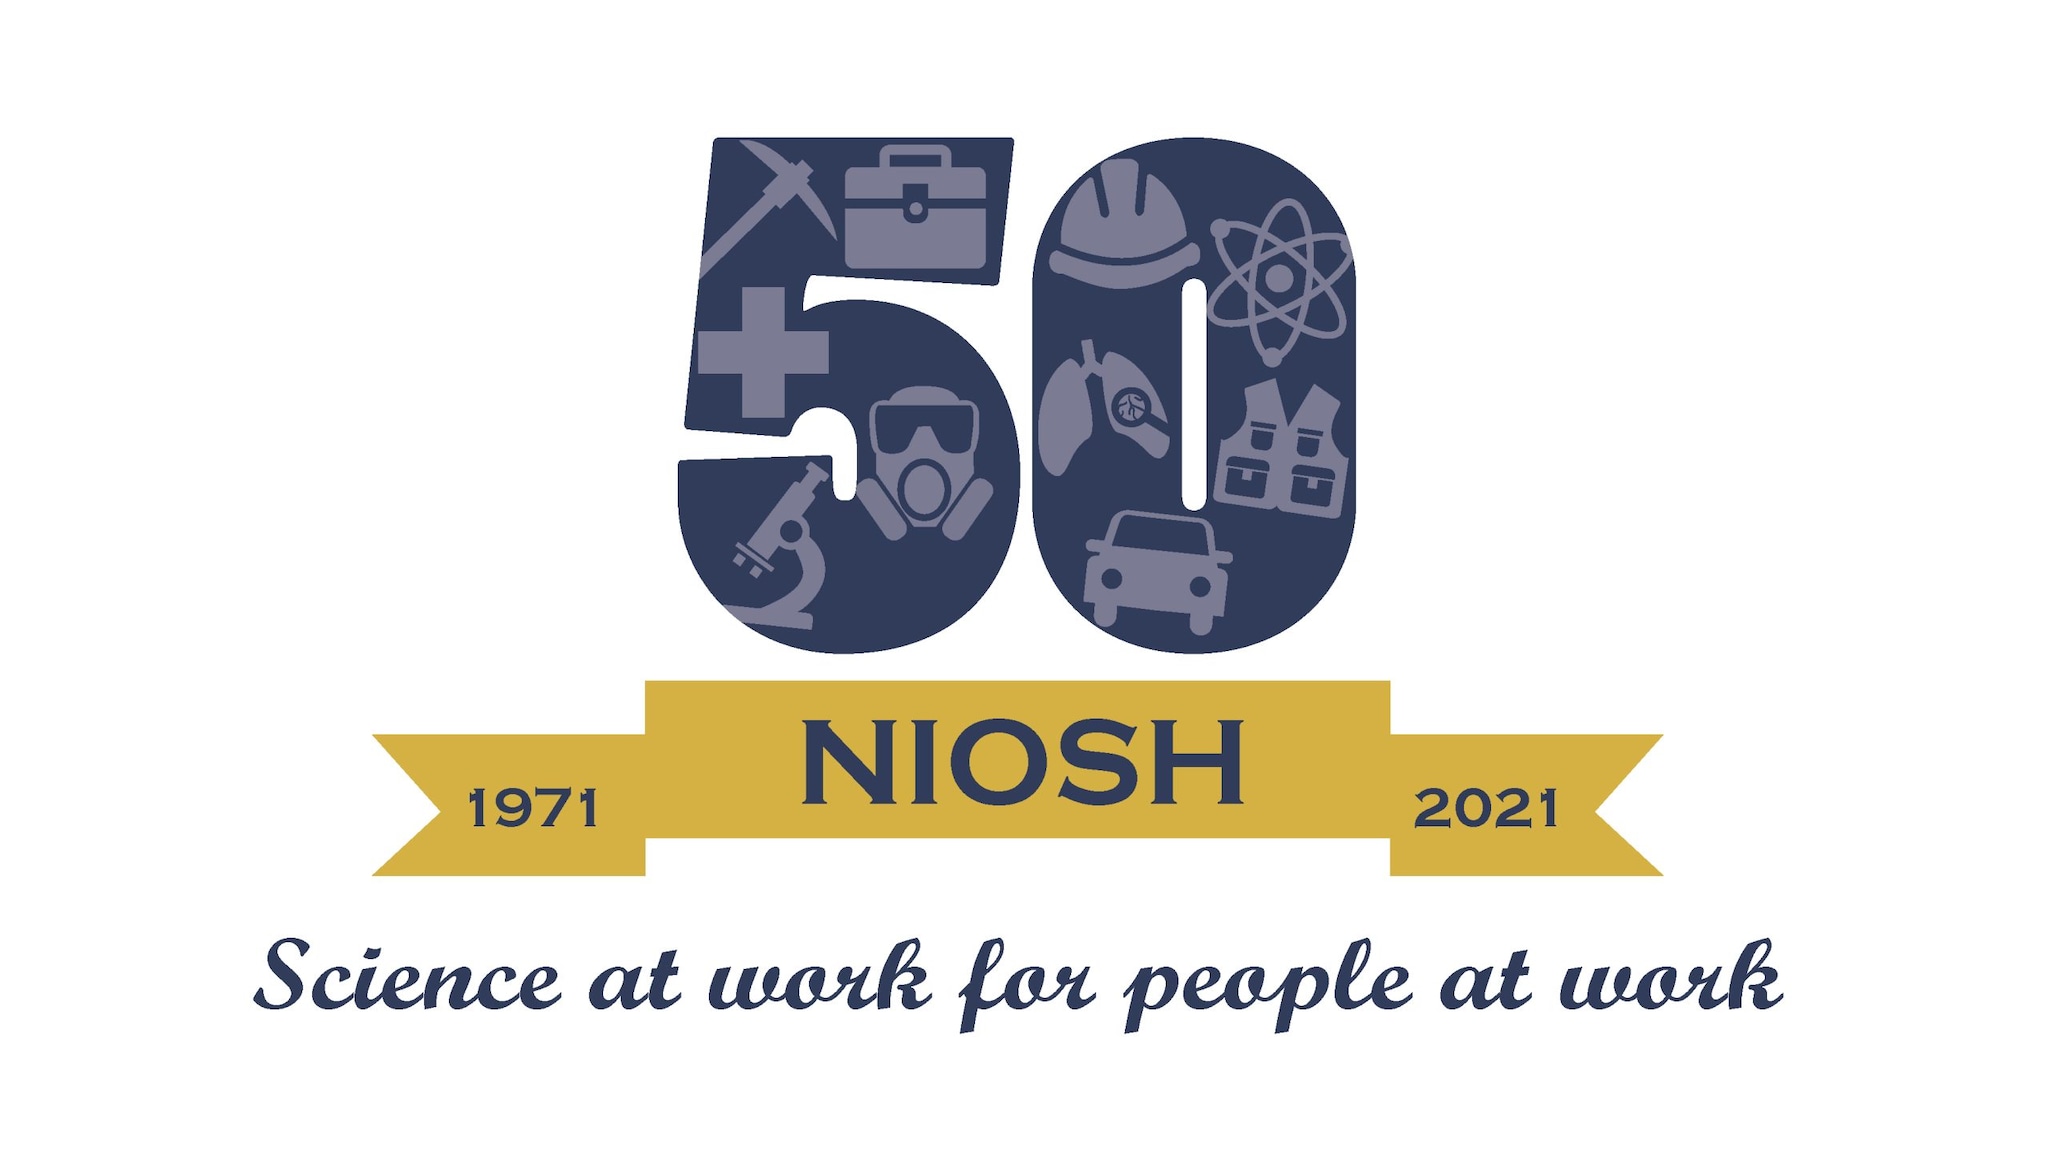 Shows a large bold blue number 50 with gold banner underneath that says 1971-2021. The tag line "Science at work for people at work" is below that in blue.